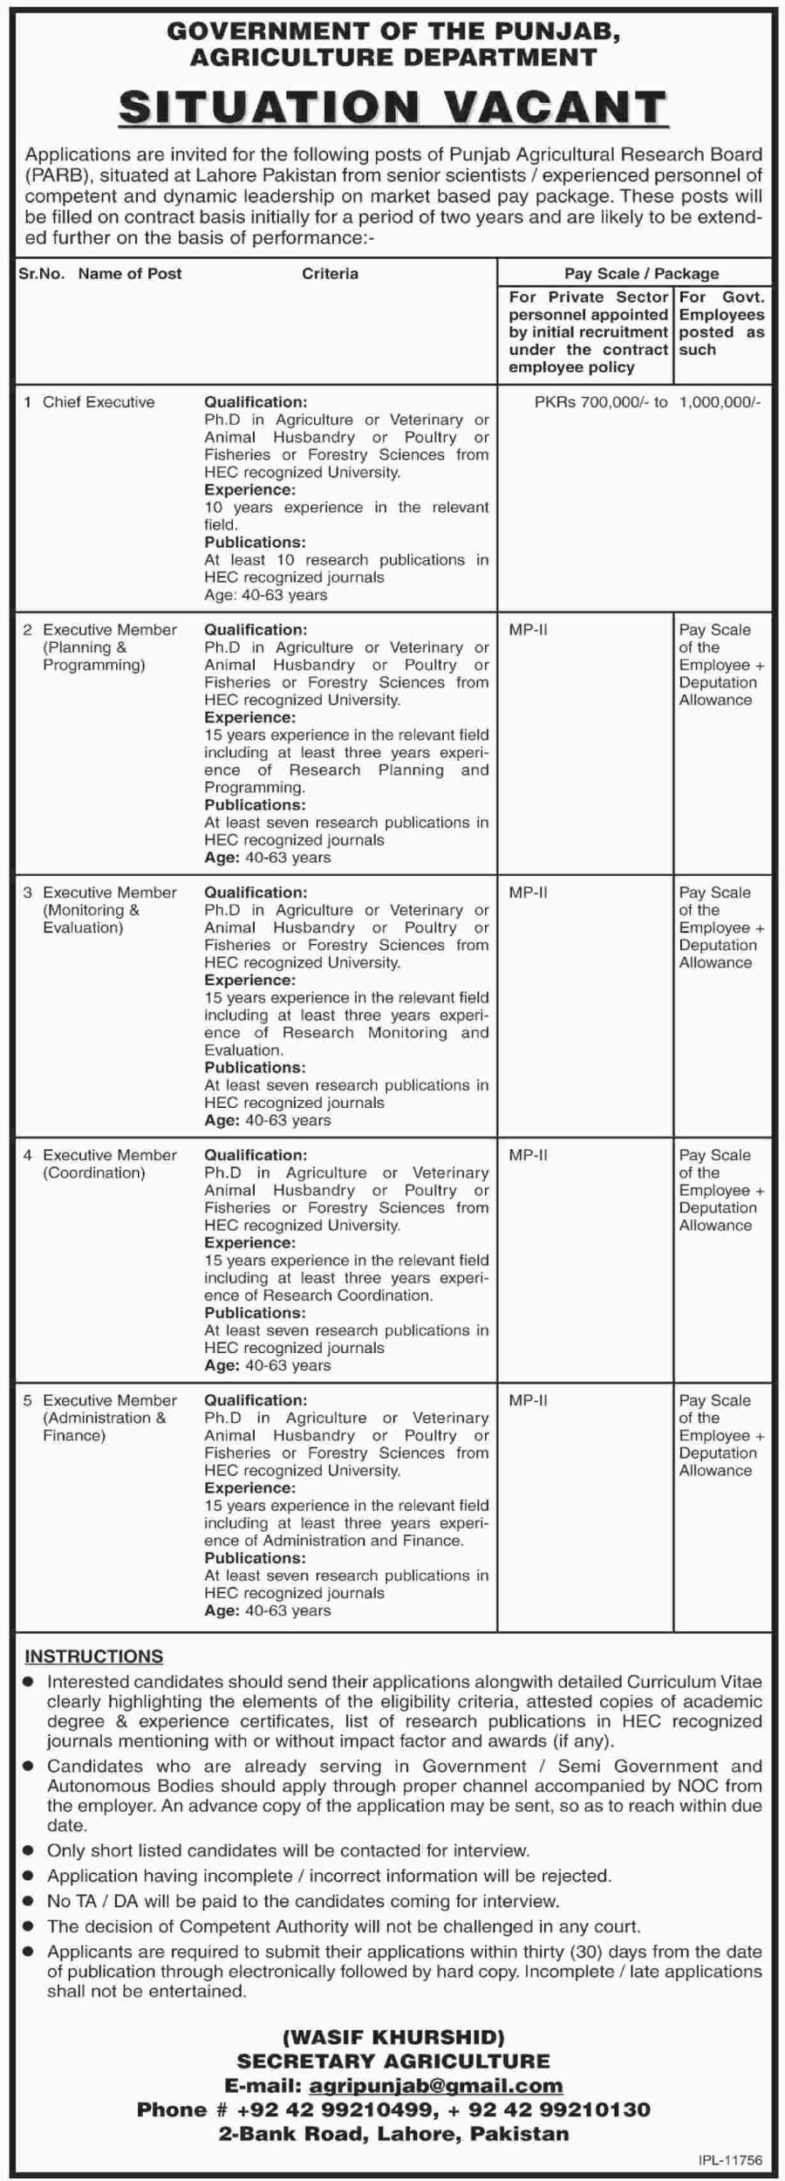 Punjab Agriculture Department Jobs 2019 for Various Management Posts